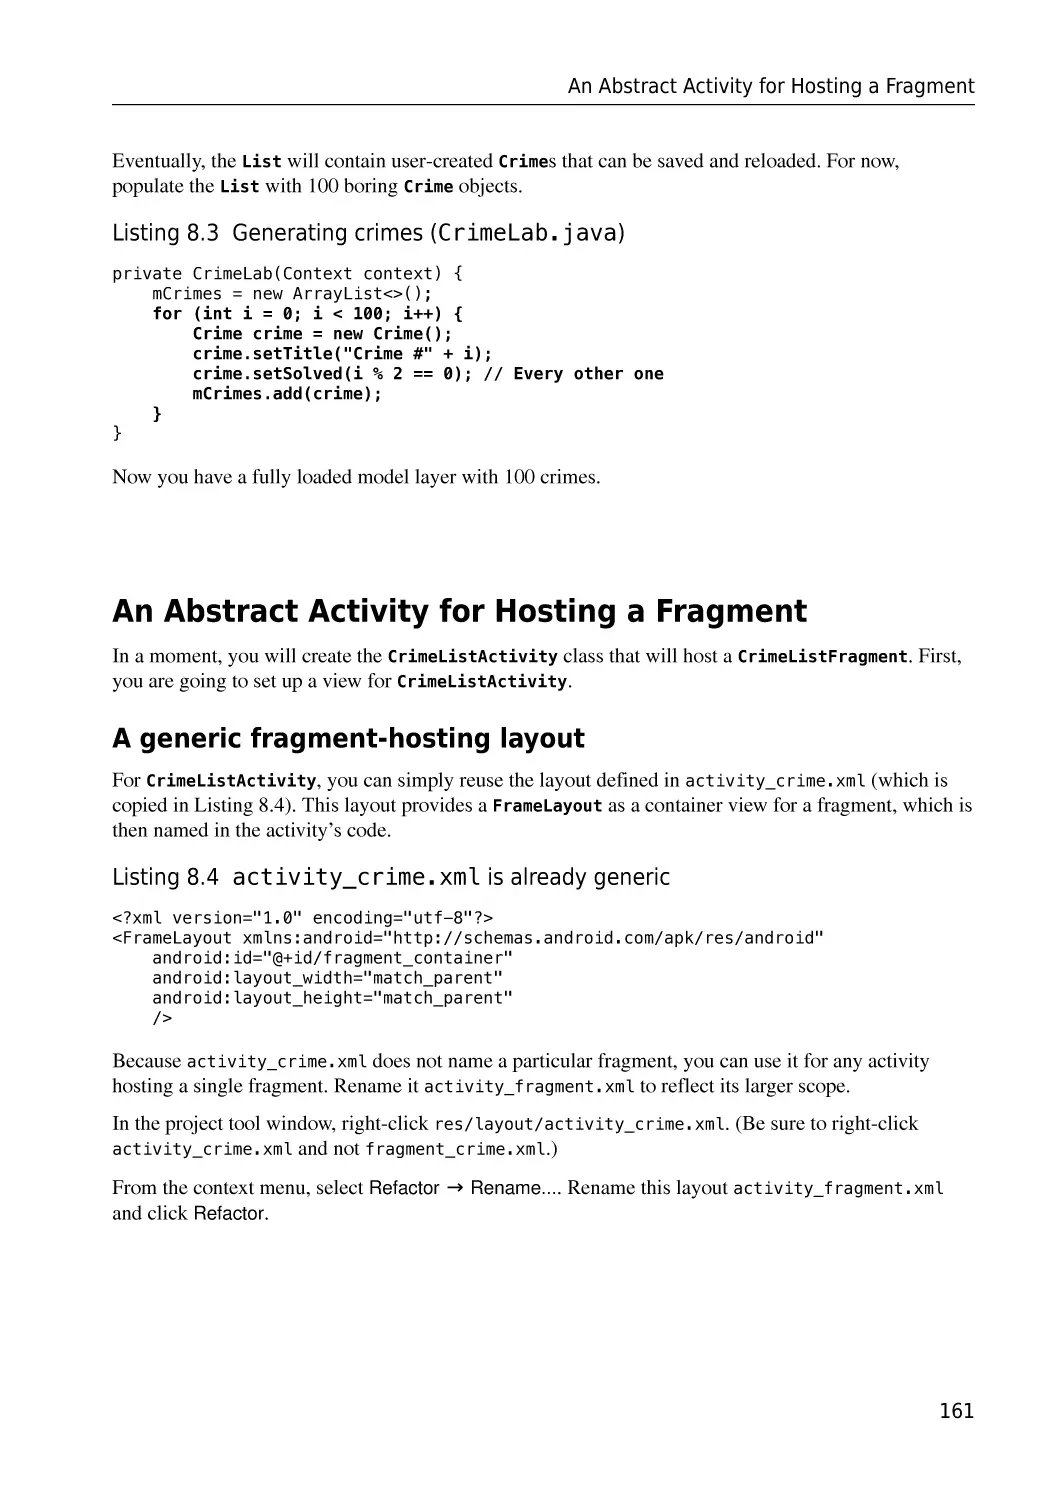 An Abstract Activity for Hosting a Fragment
A generic fragment-hosting layout